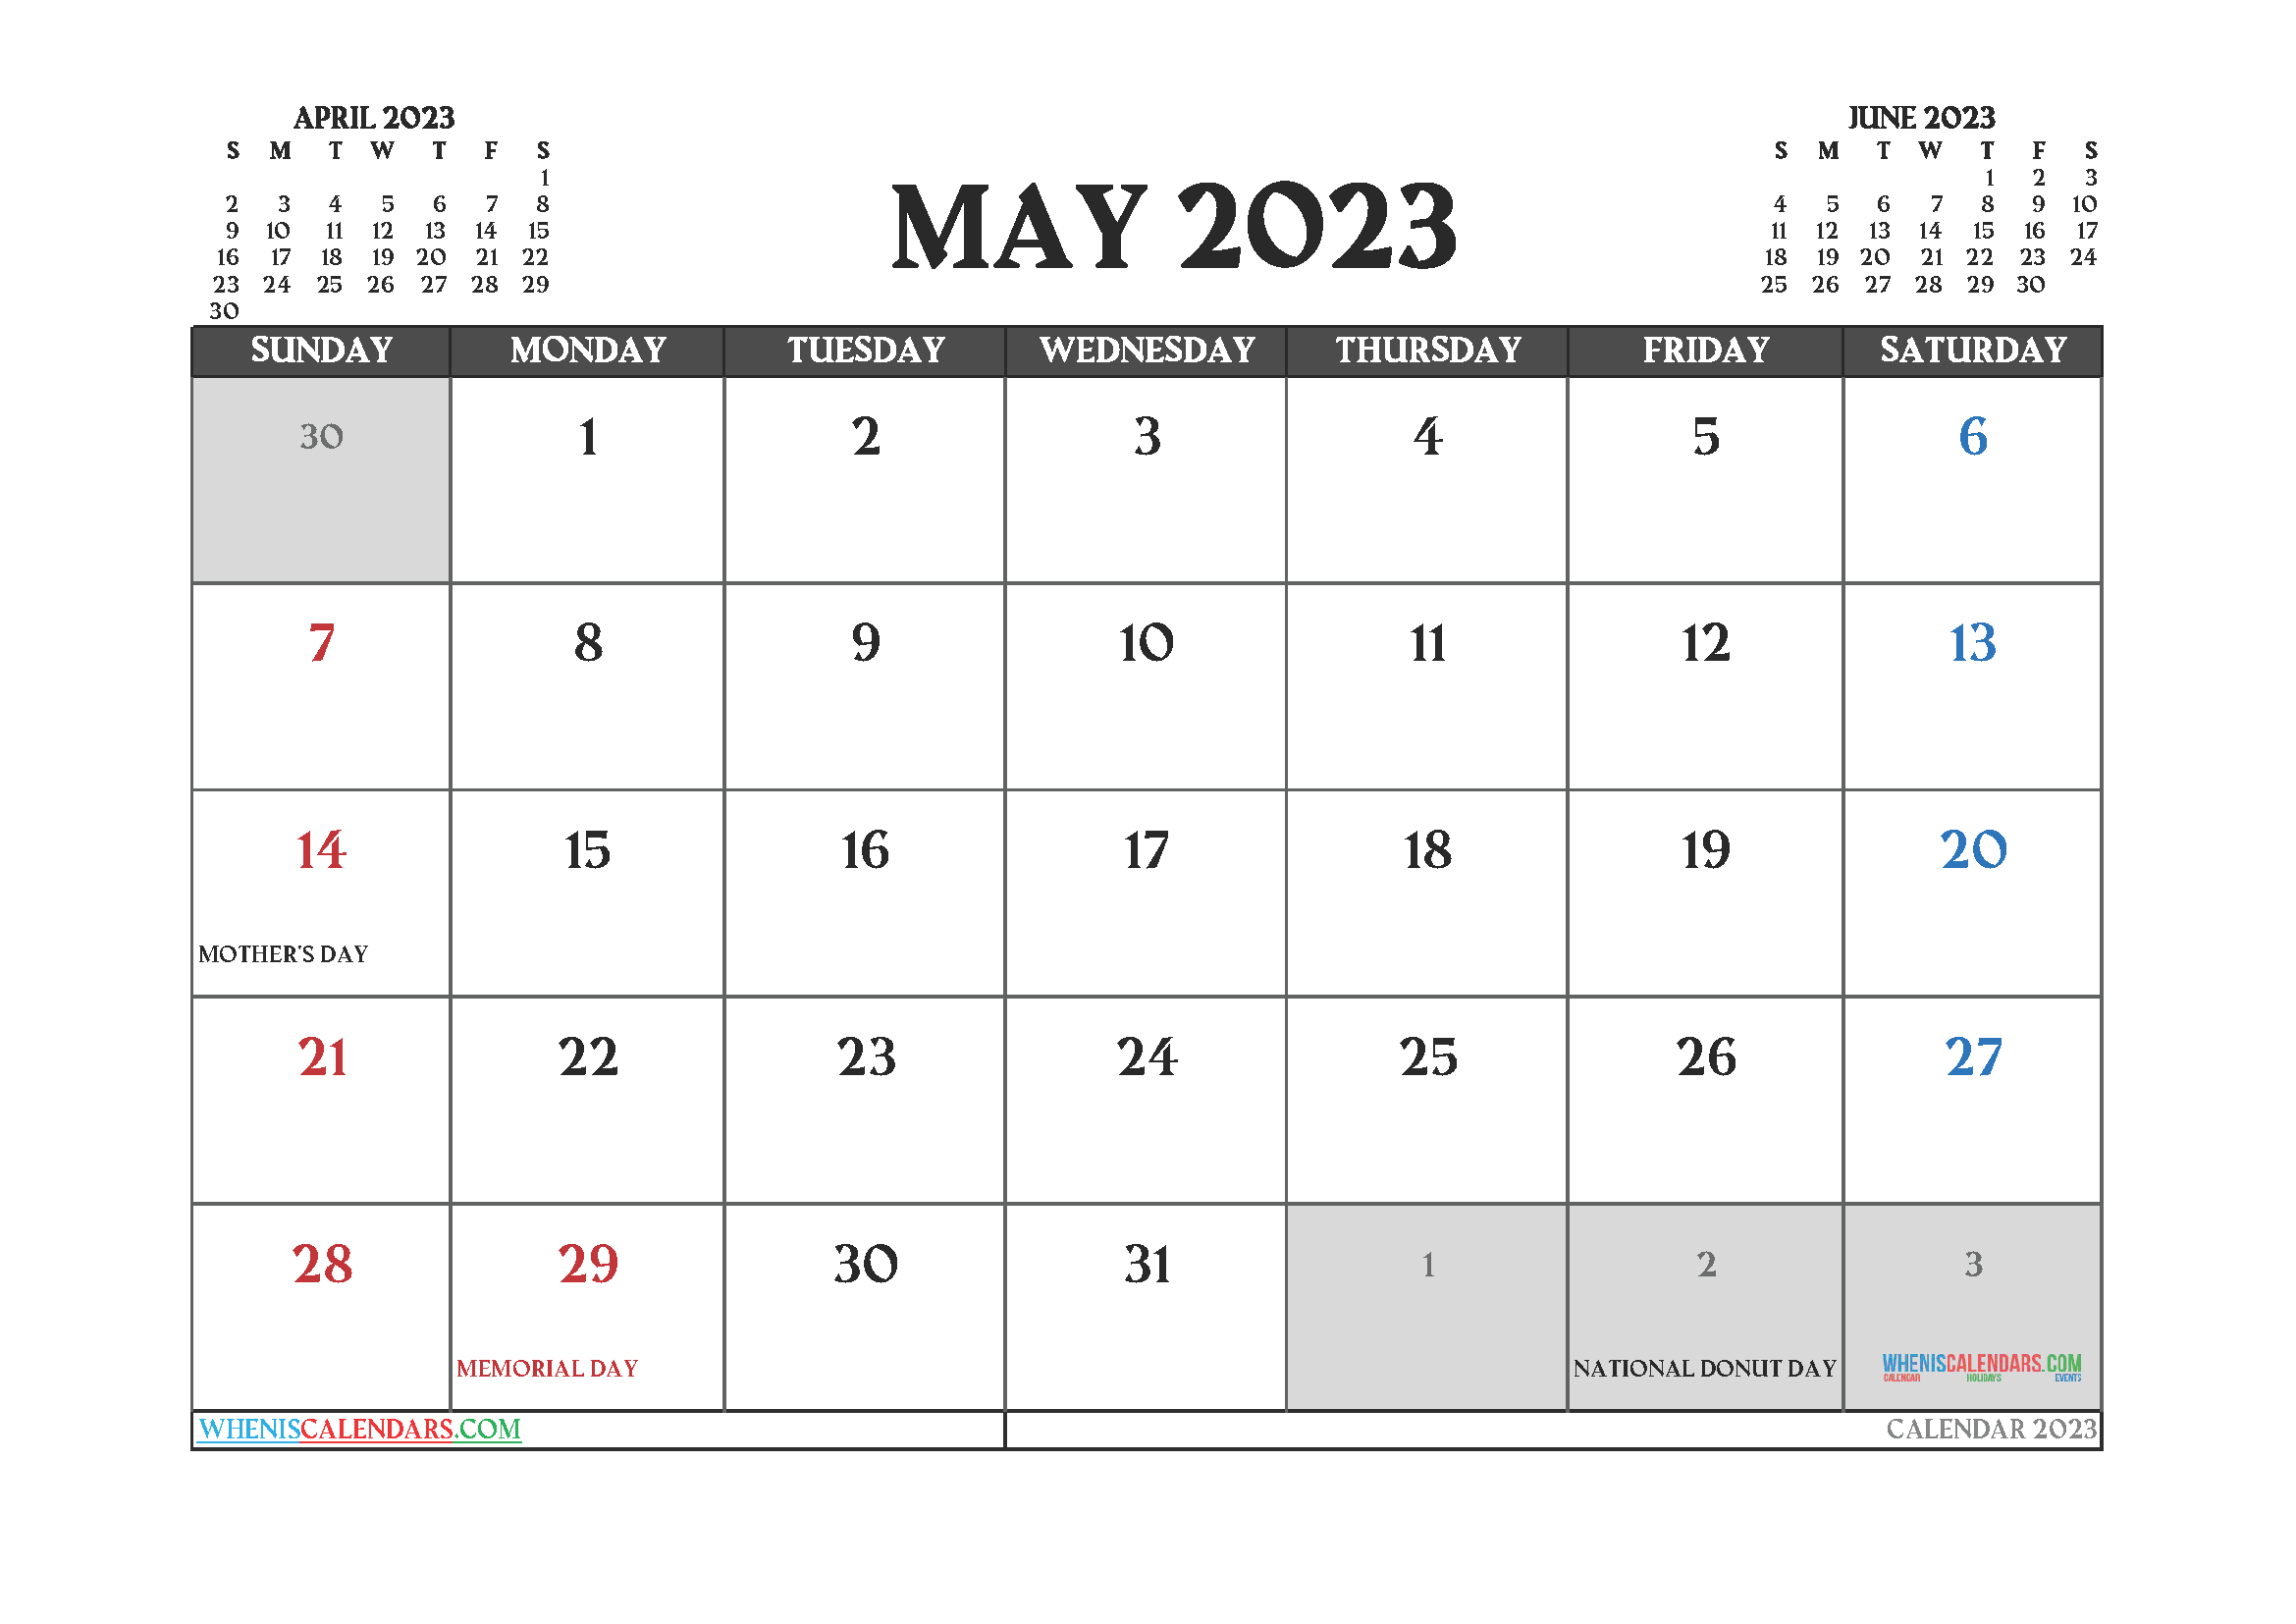 Calendar May 2023 with Holidays